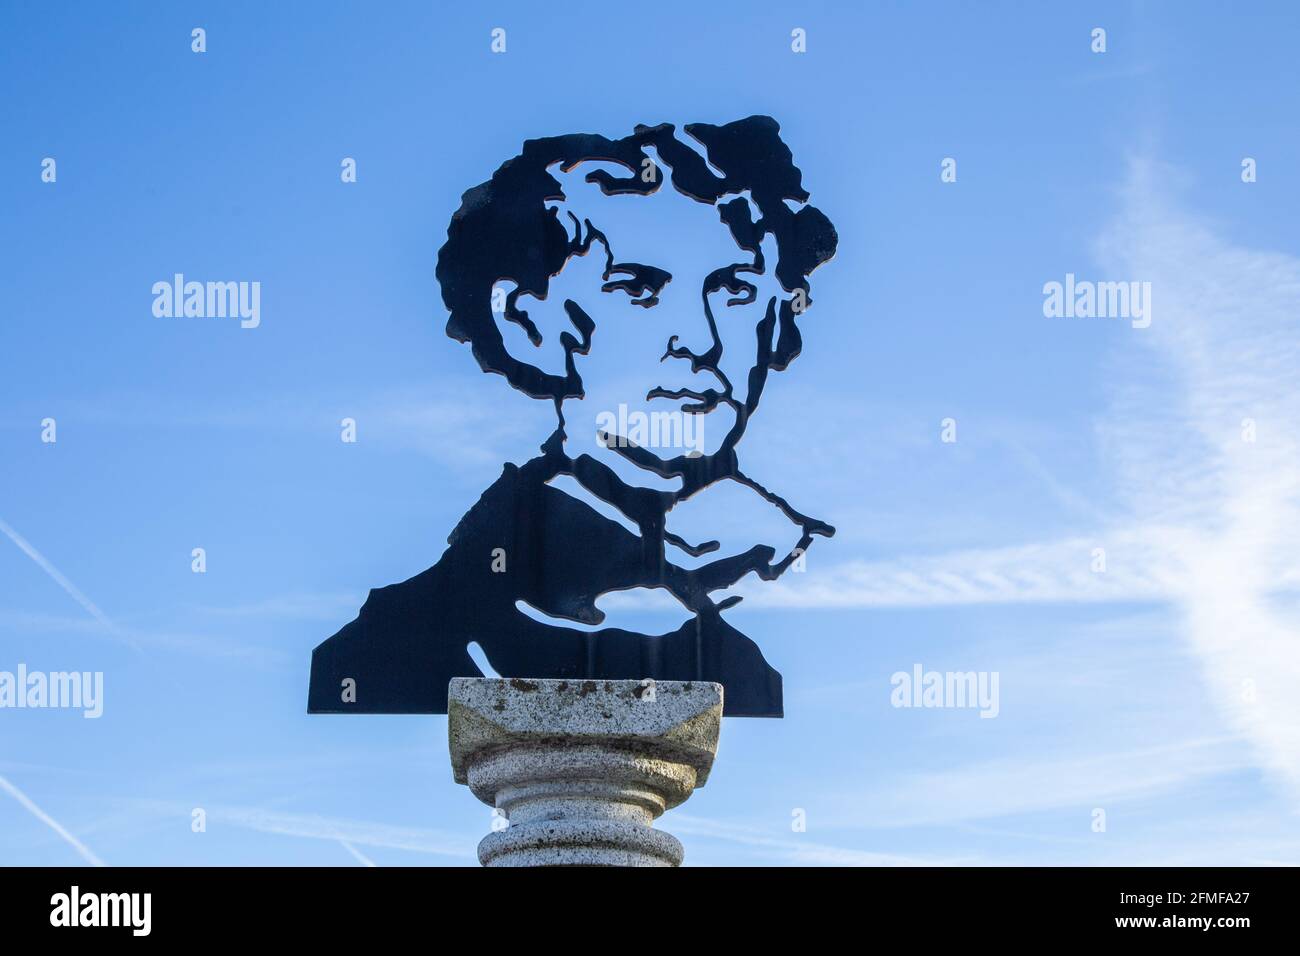 Herrenchiemsee, Germany - 15 December 2019 - Statue of King Ludwig II in paper cutout style portrait displays against blue sky at a boat dock in Herre Stock Photo